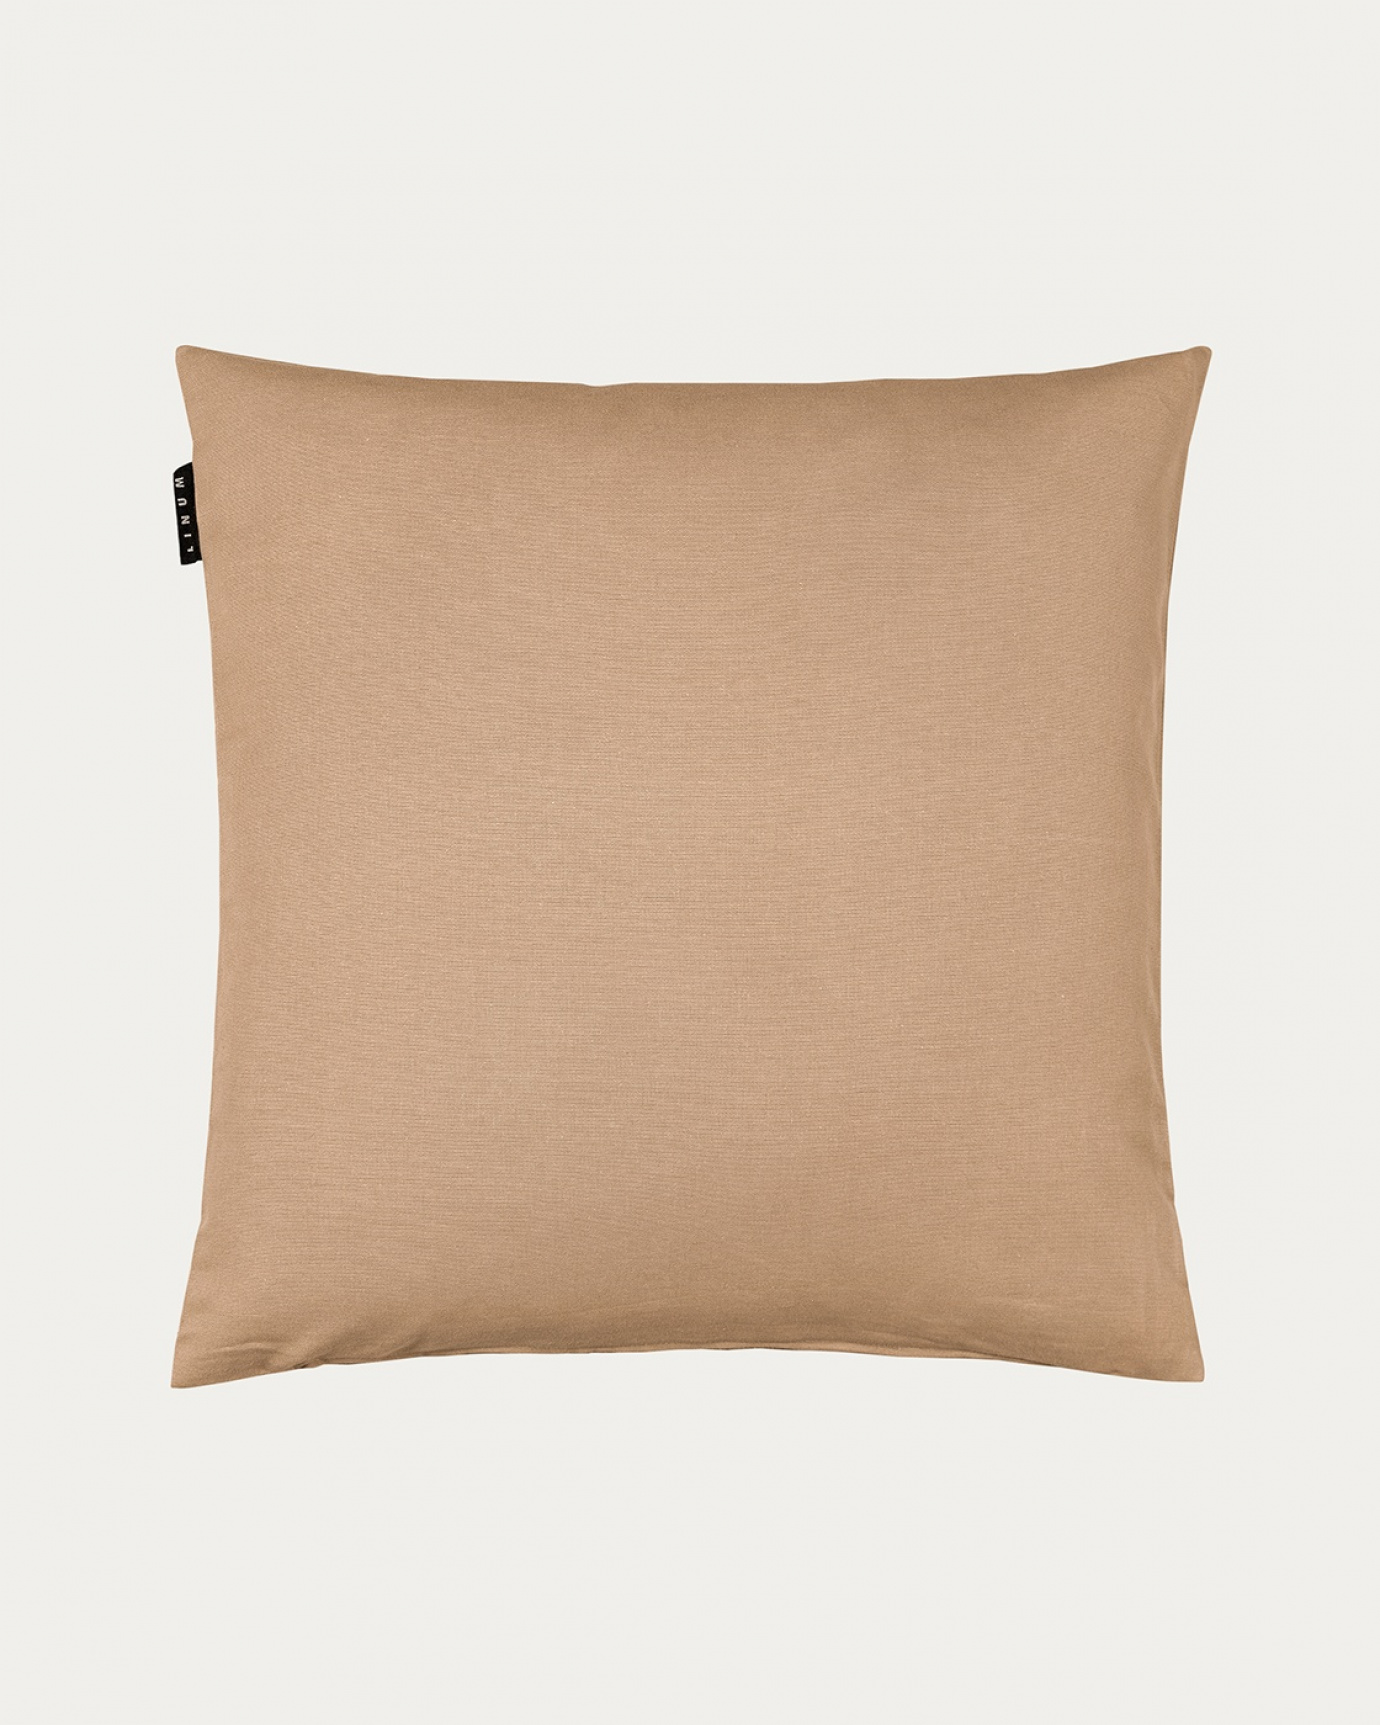 Product image camel brown ANNABELL cushion cover made of soft cotton from LINUM DESIGN. Size 50x50 cm.